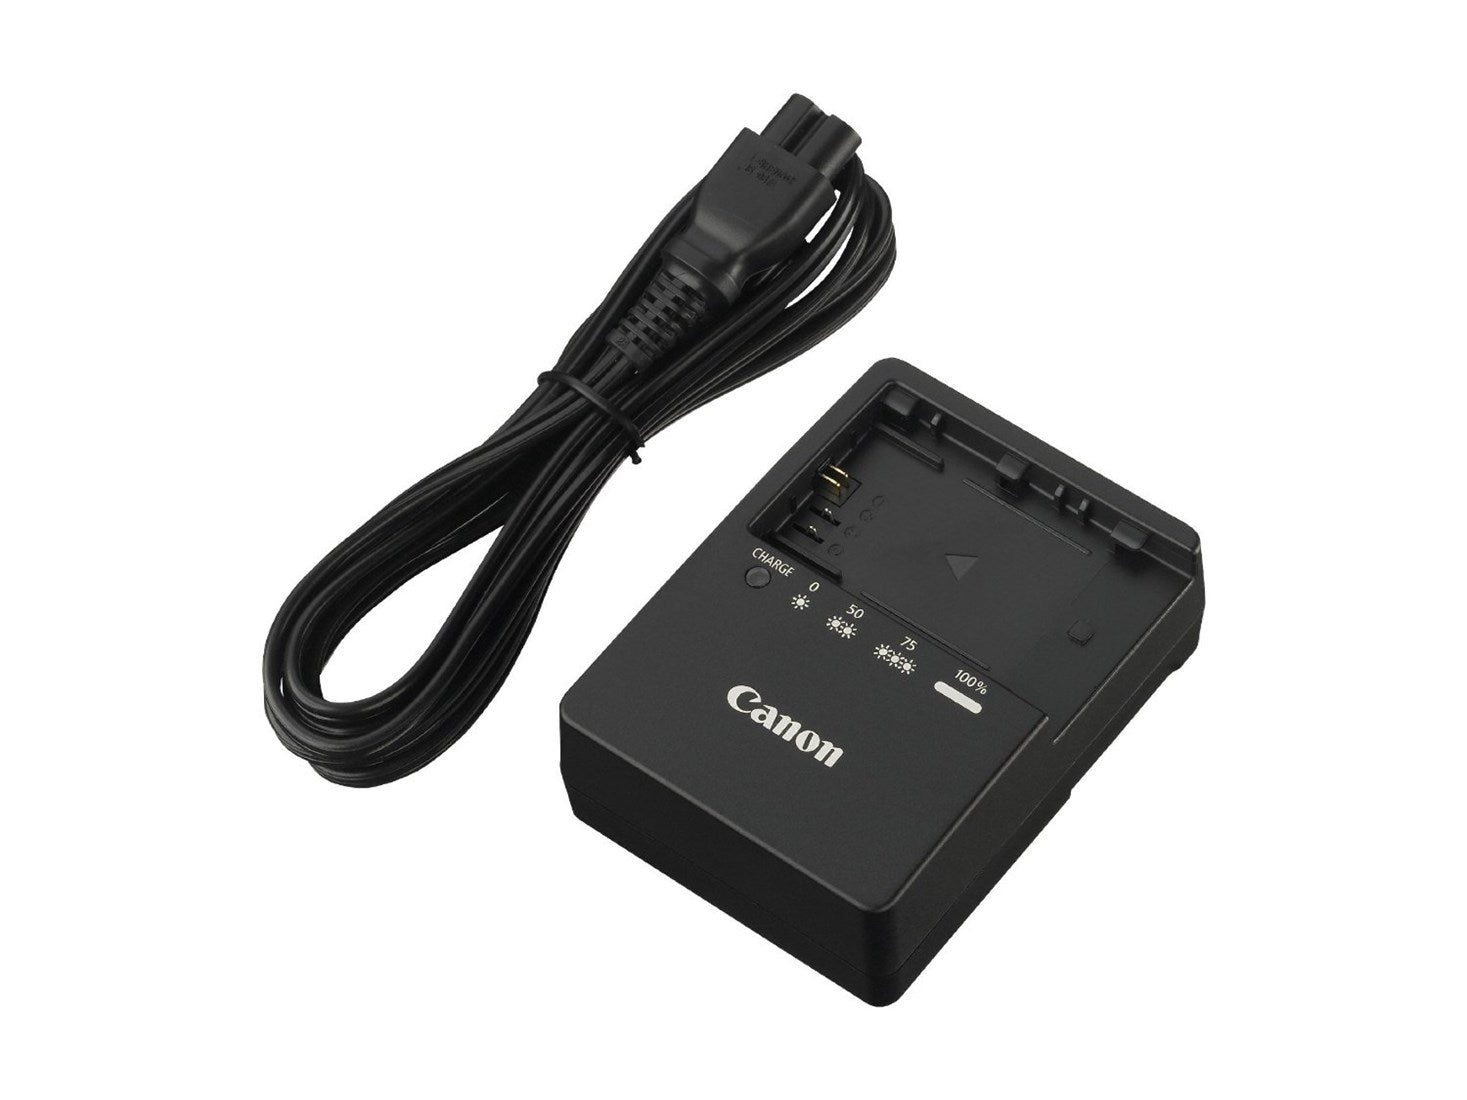 Product Image of Canon LC-E6 Battery Charger for EOS 5D Mk II, III, 7D, 7D MK II, 60D Camera